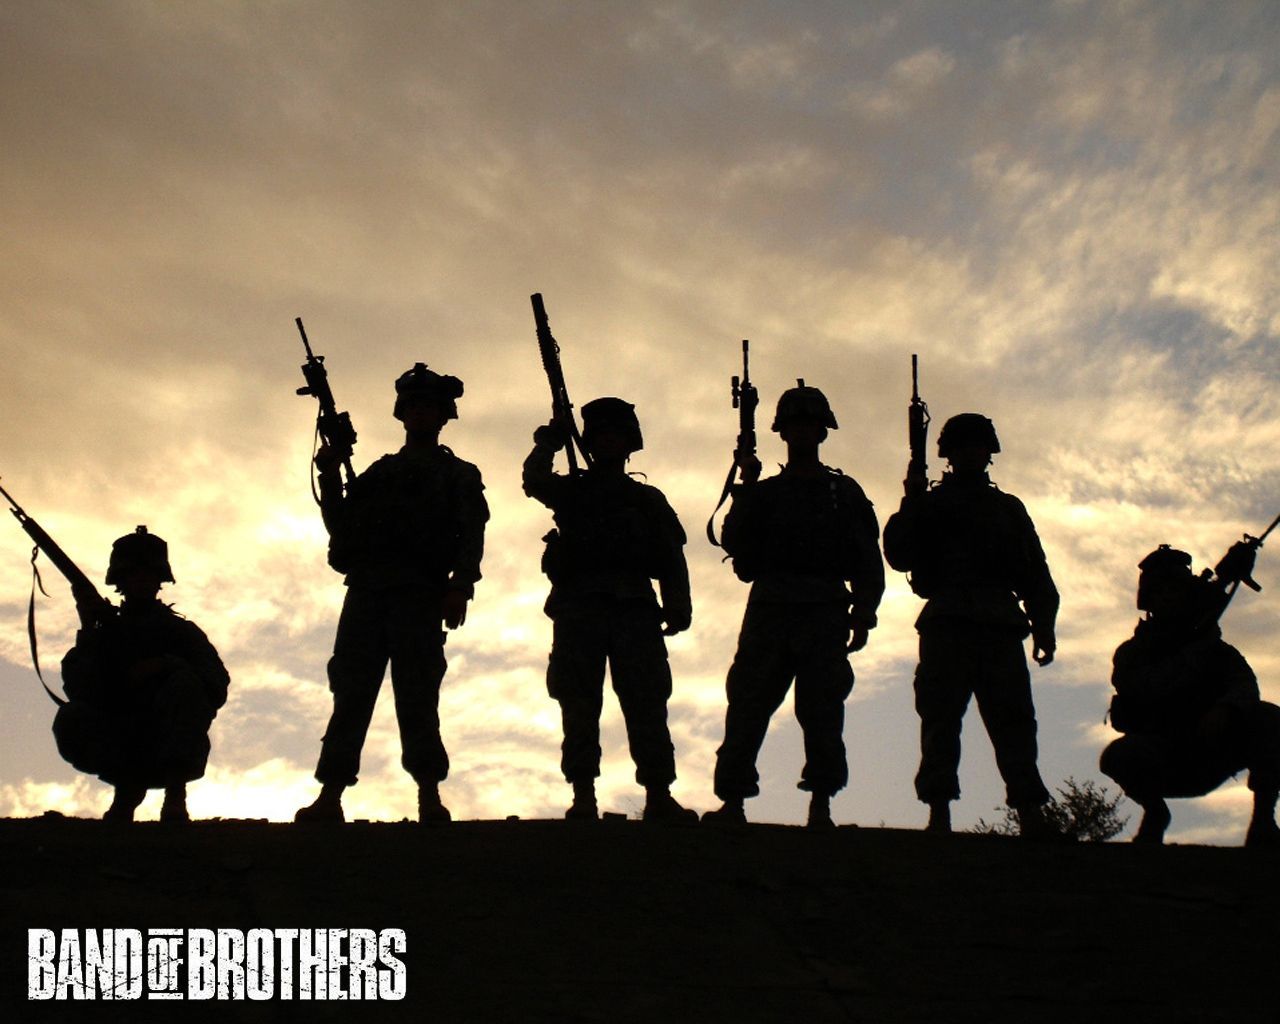 Band of Brothers TV Series Wallpaper Background. Military, Band of brothers, Veteran